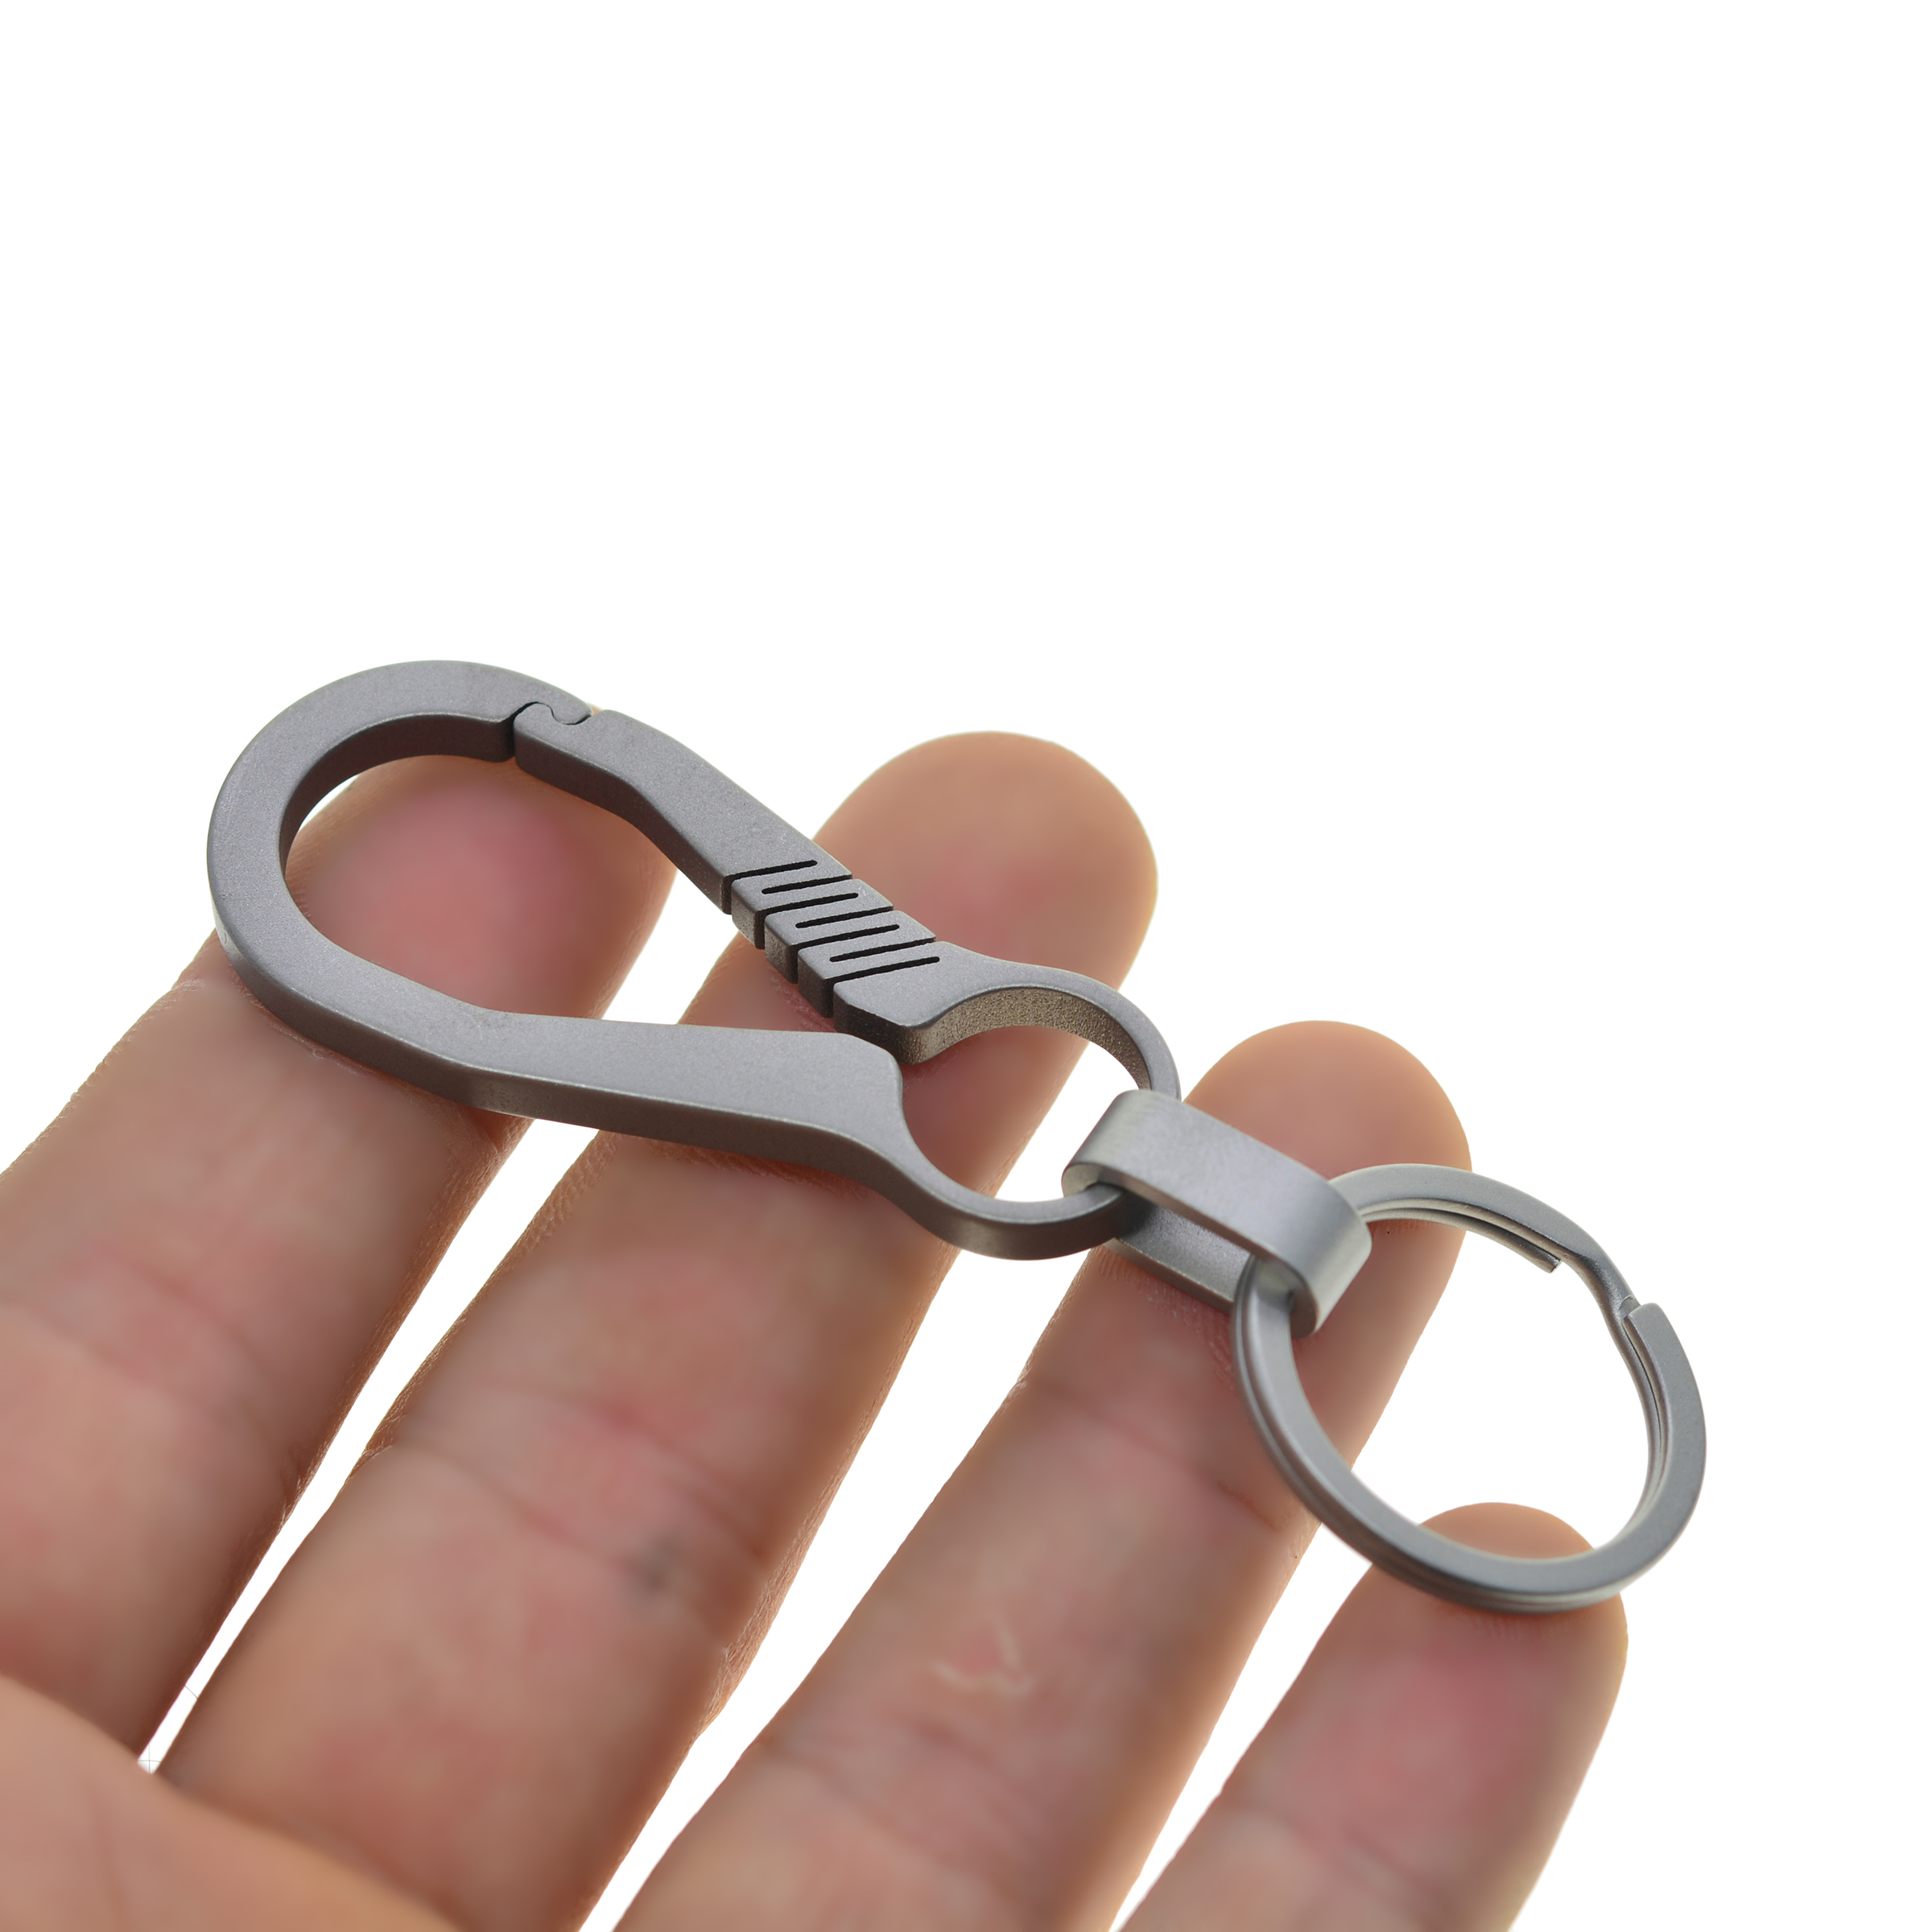 Key Rings Extra light weight titanium oval drop snap spring Lock Carabiner split ring Clasp Keychain FOB EDC house warming gif